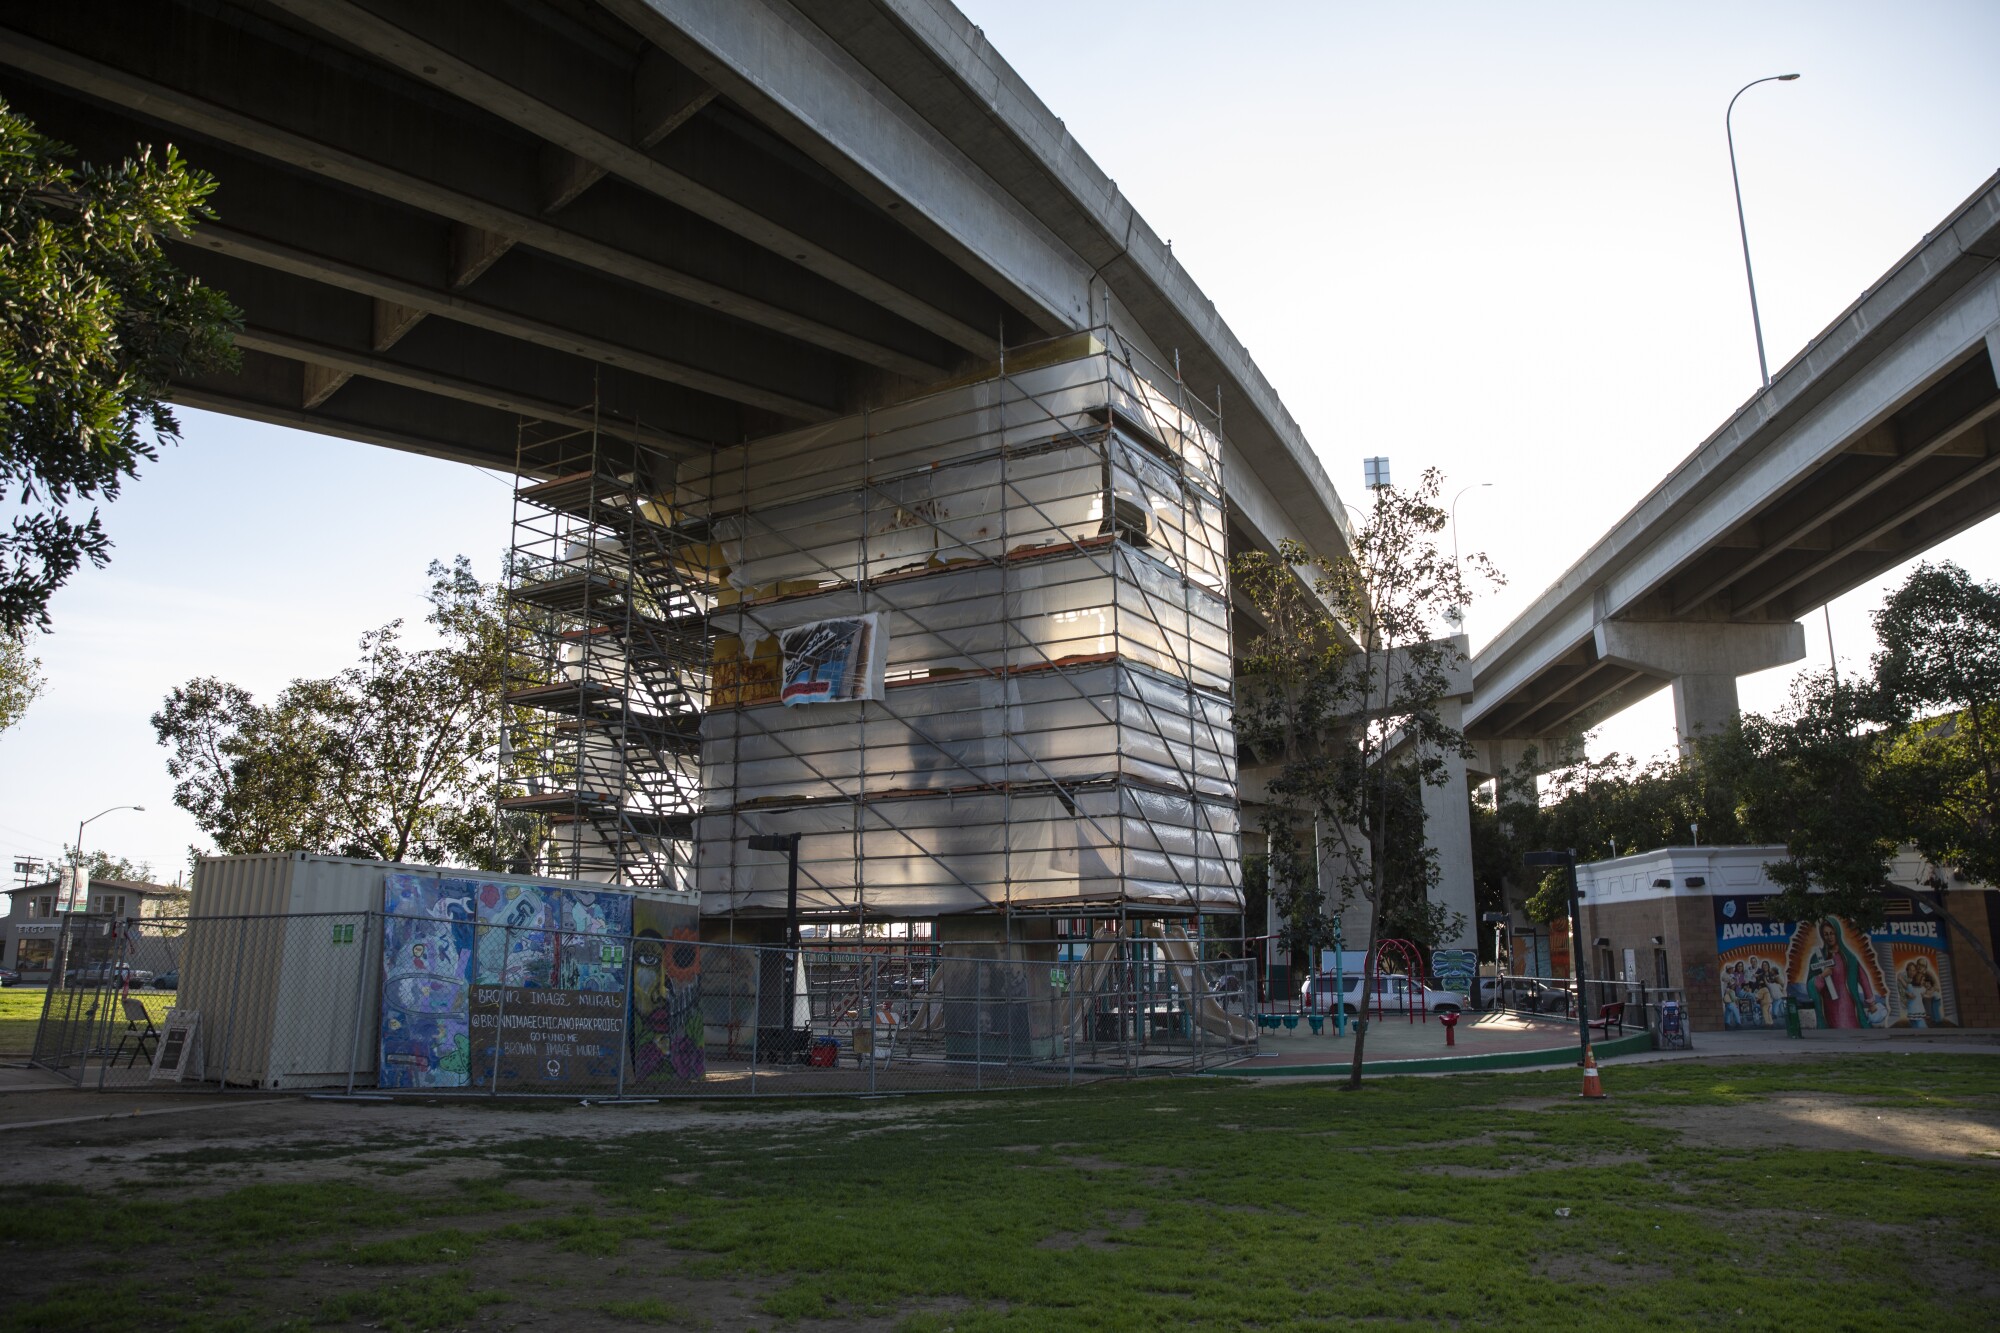 A scaffold surrounds a five-story mural being painted on a pillar in Chicano Park that features images from car clubs.